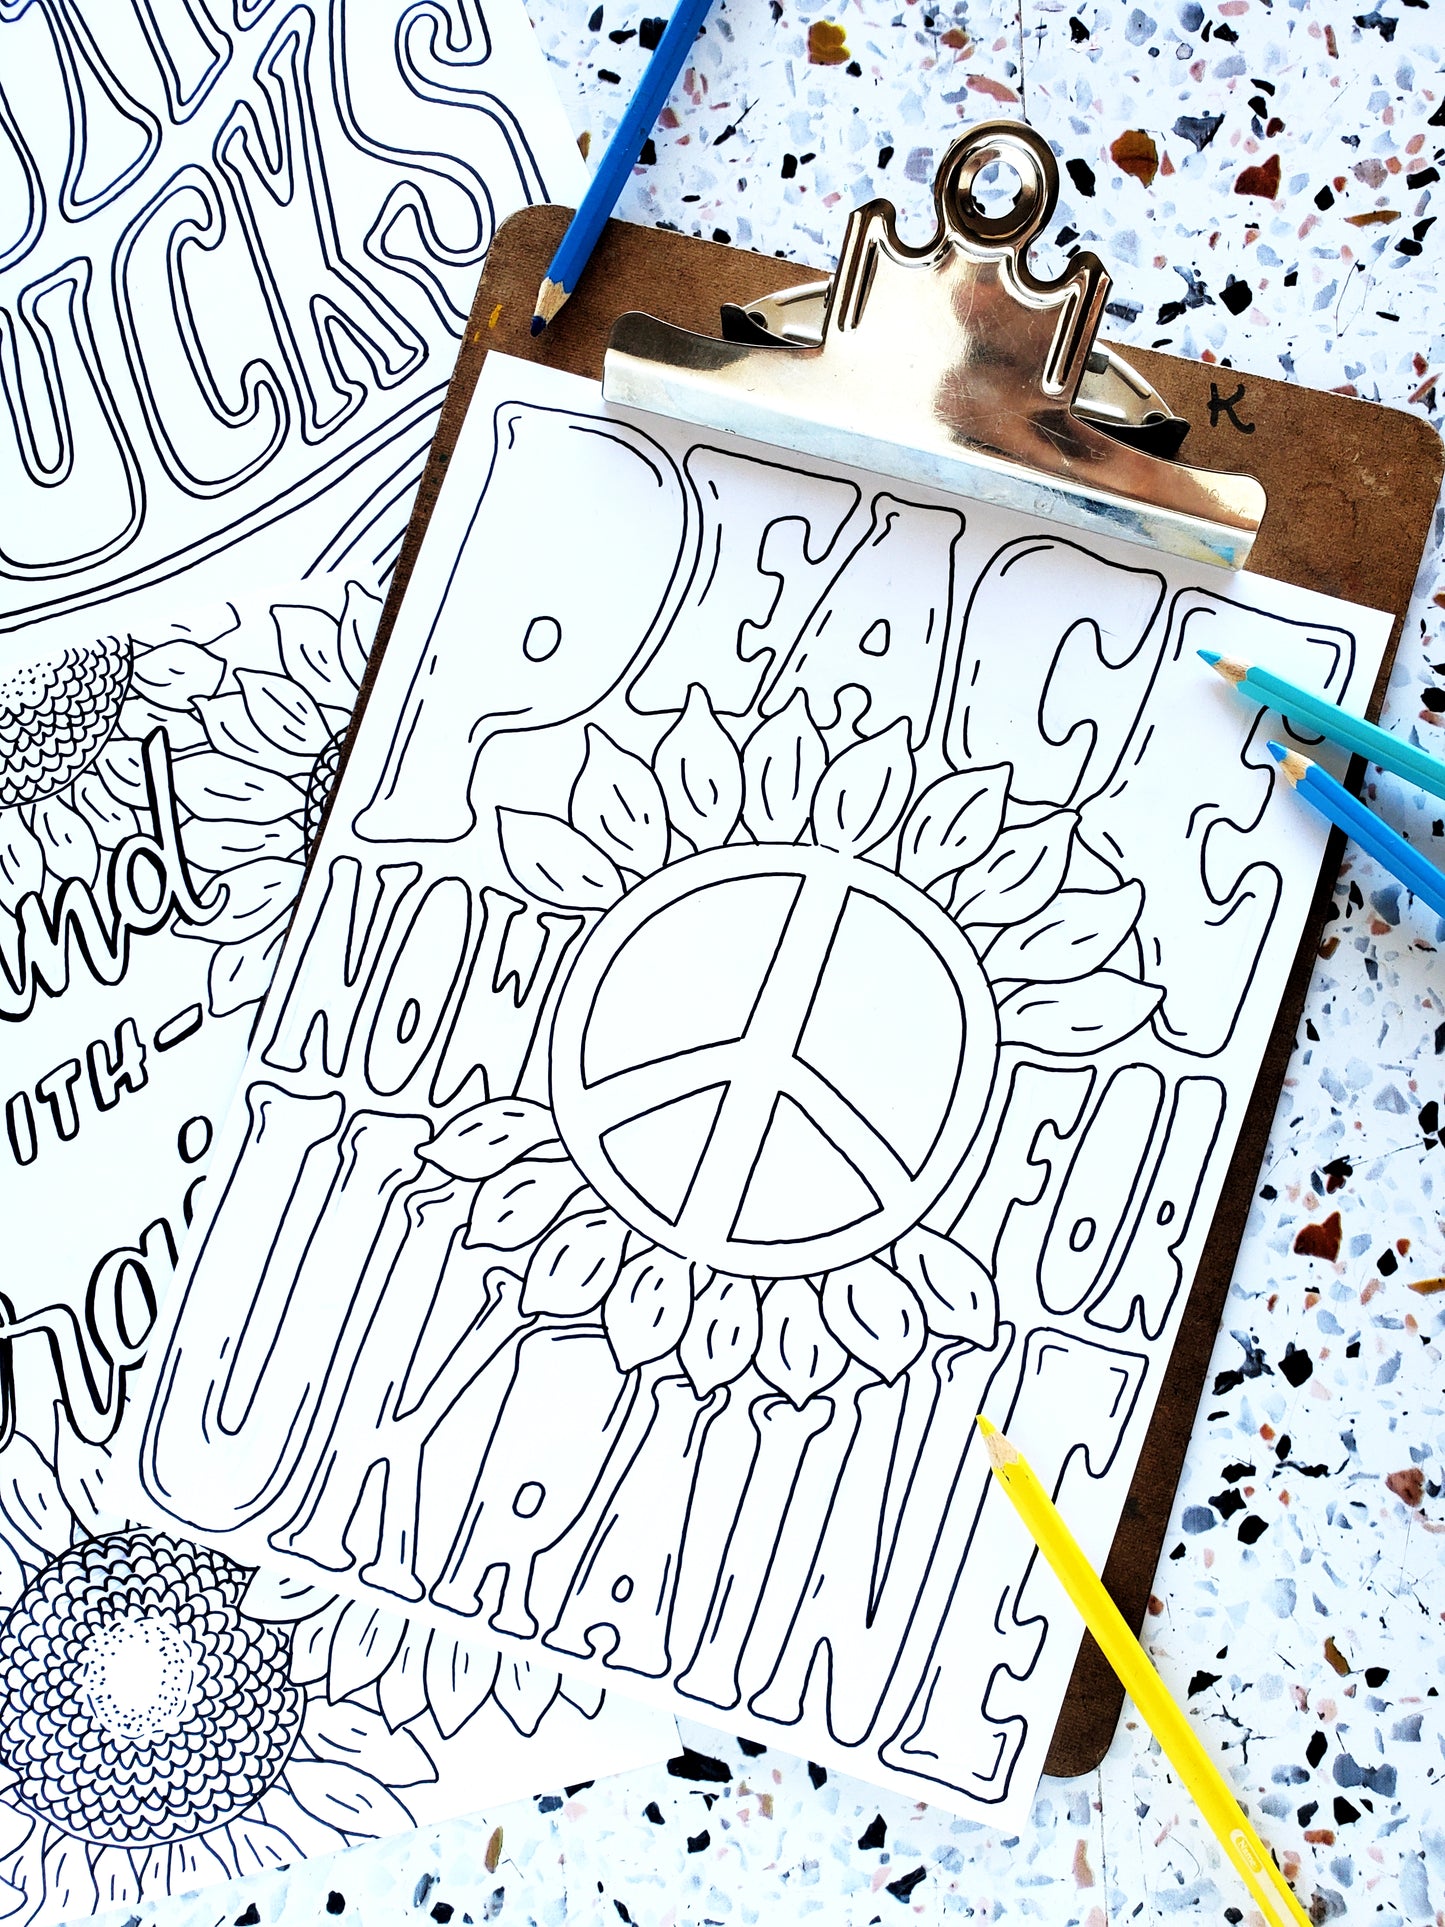 Support Ukraine Coloring Page and Protest Posters - Ukraine Fundraiser